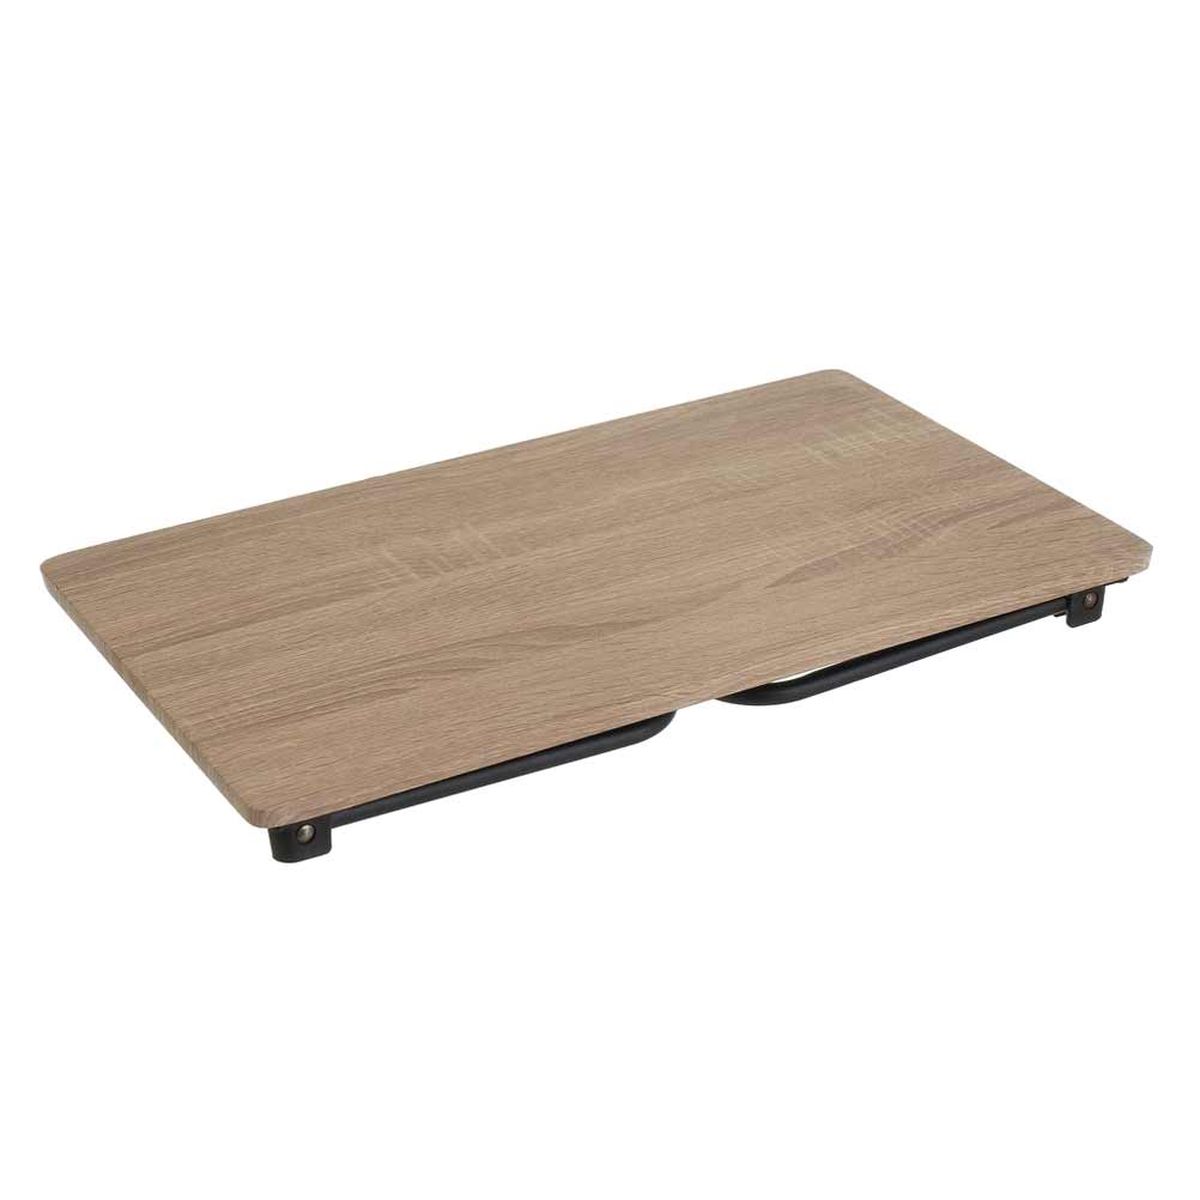 Folding MDF and metal bed tray